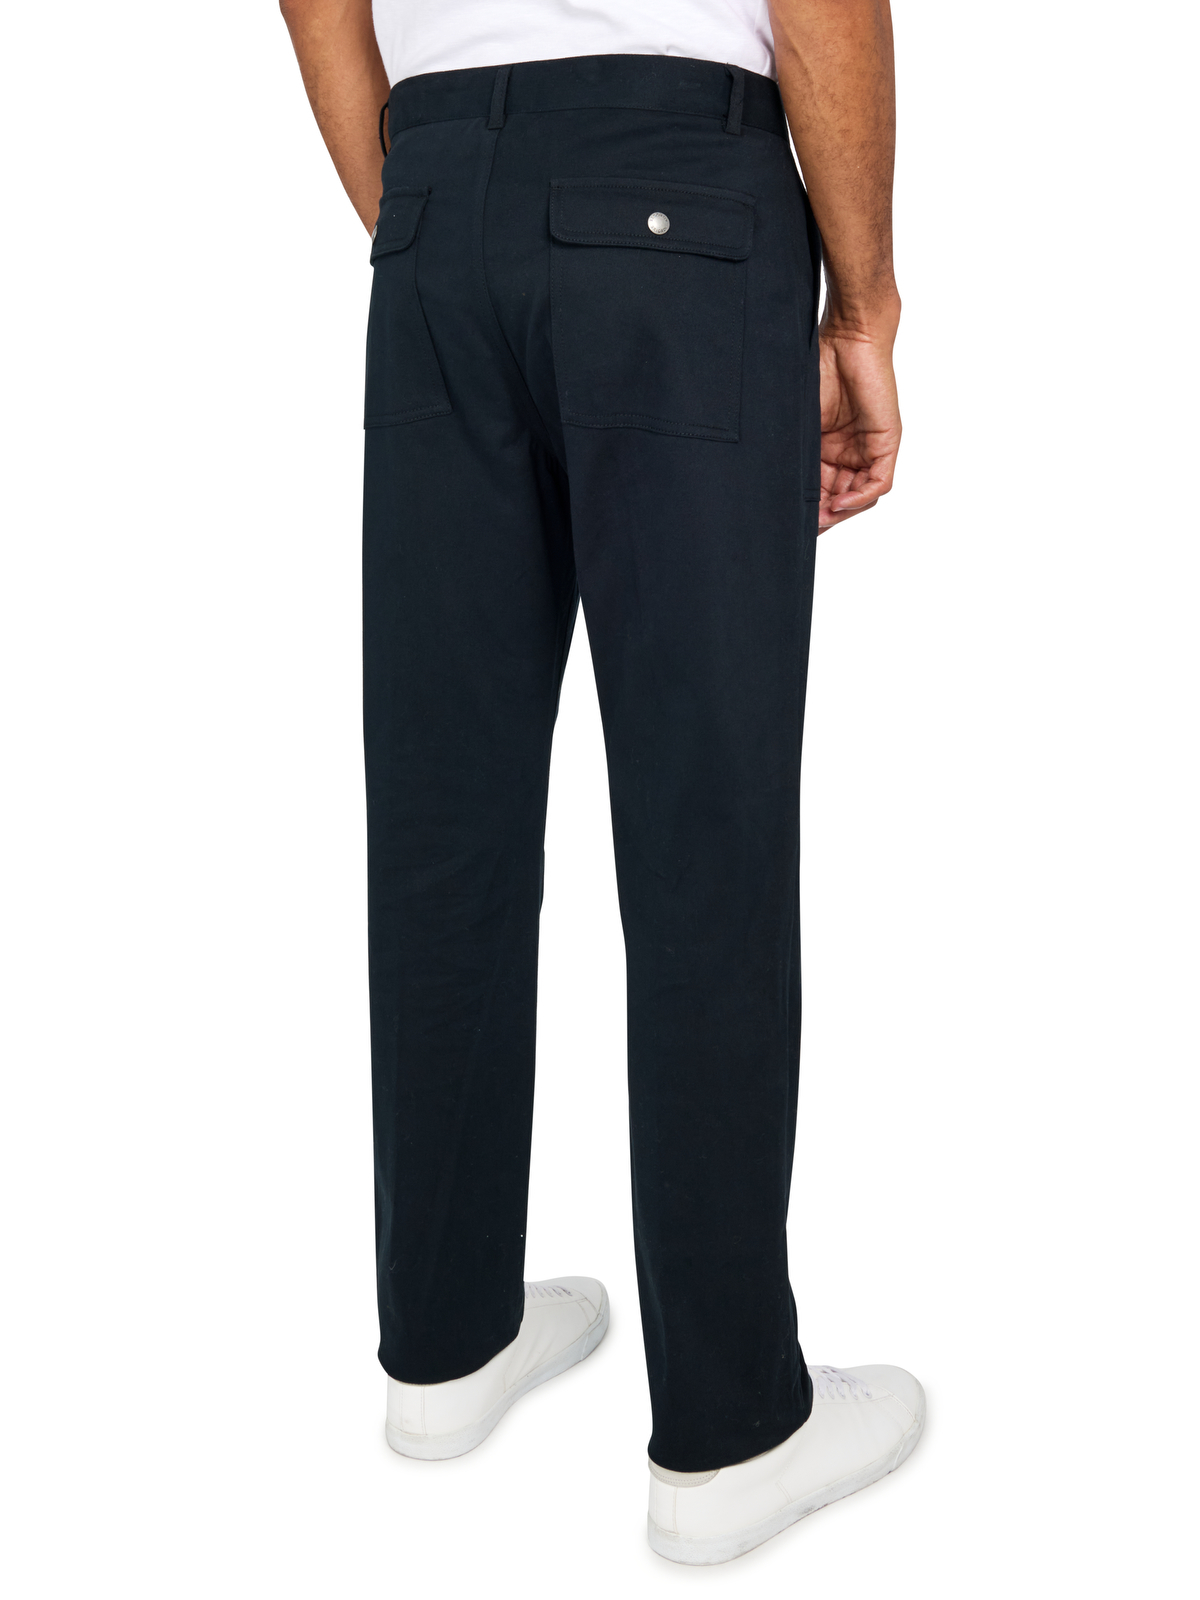 SOLID UTILITY PANTS